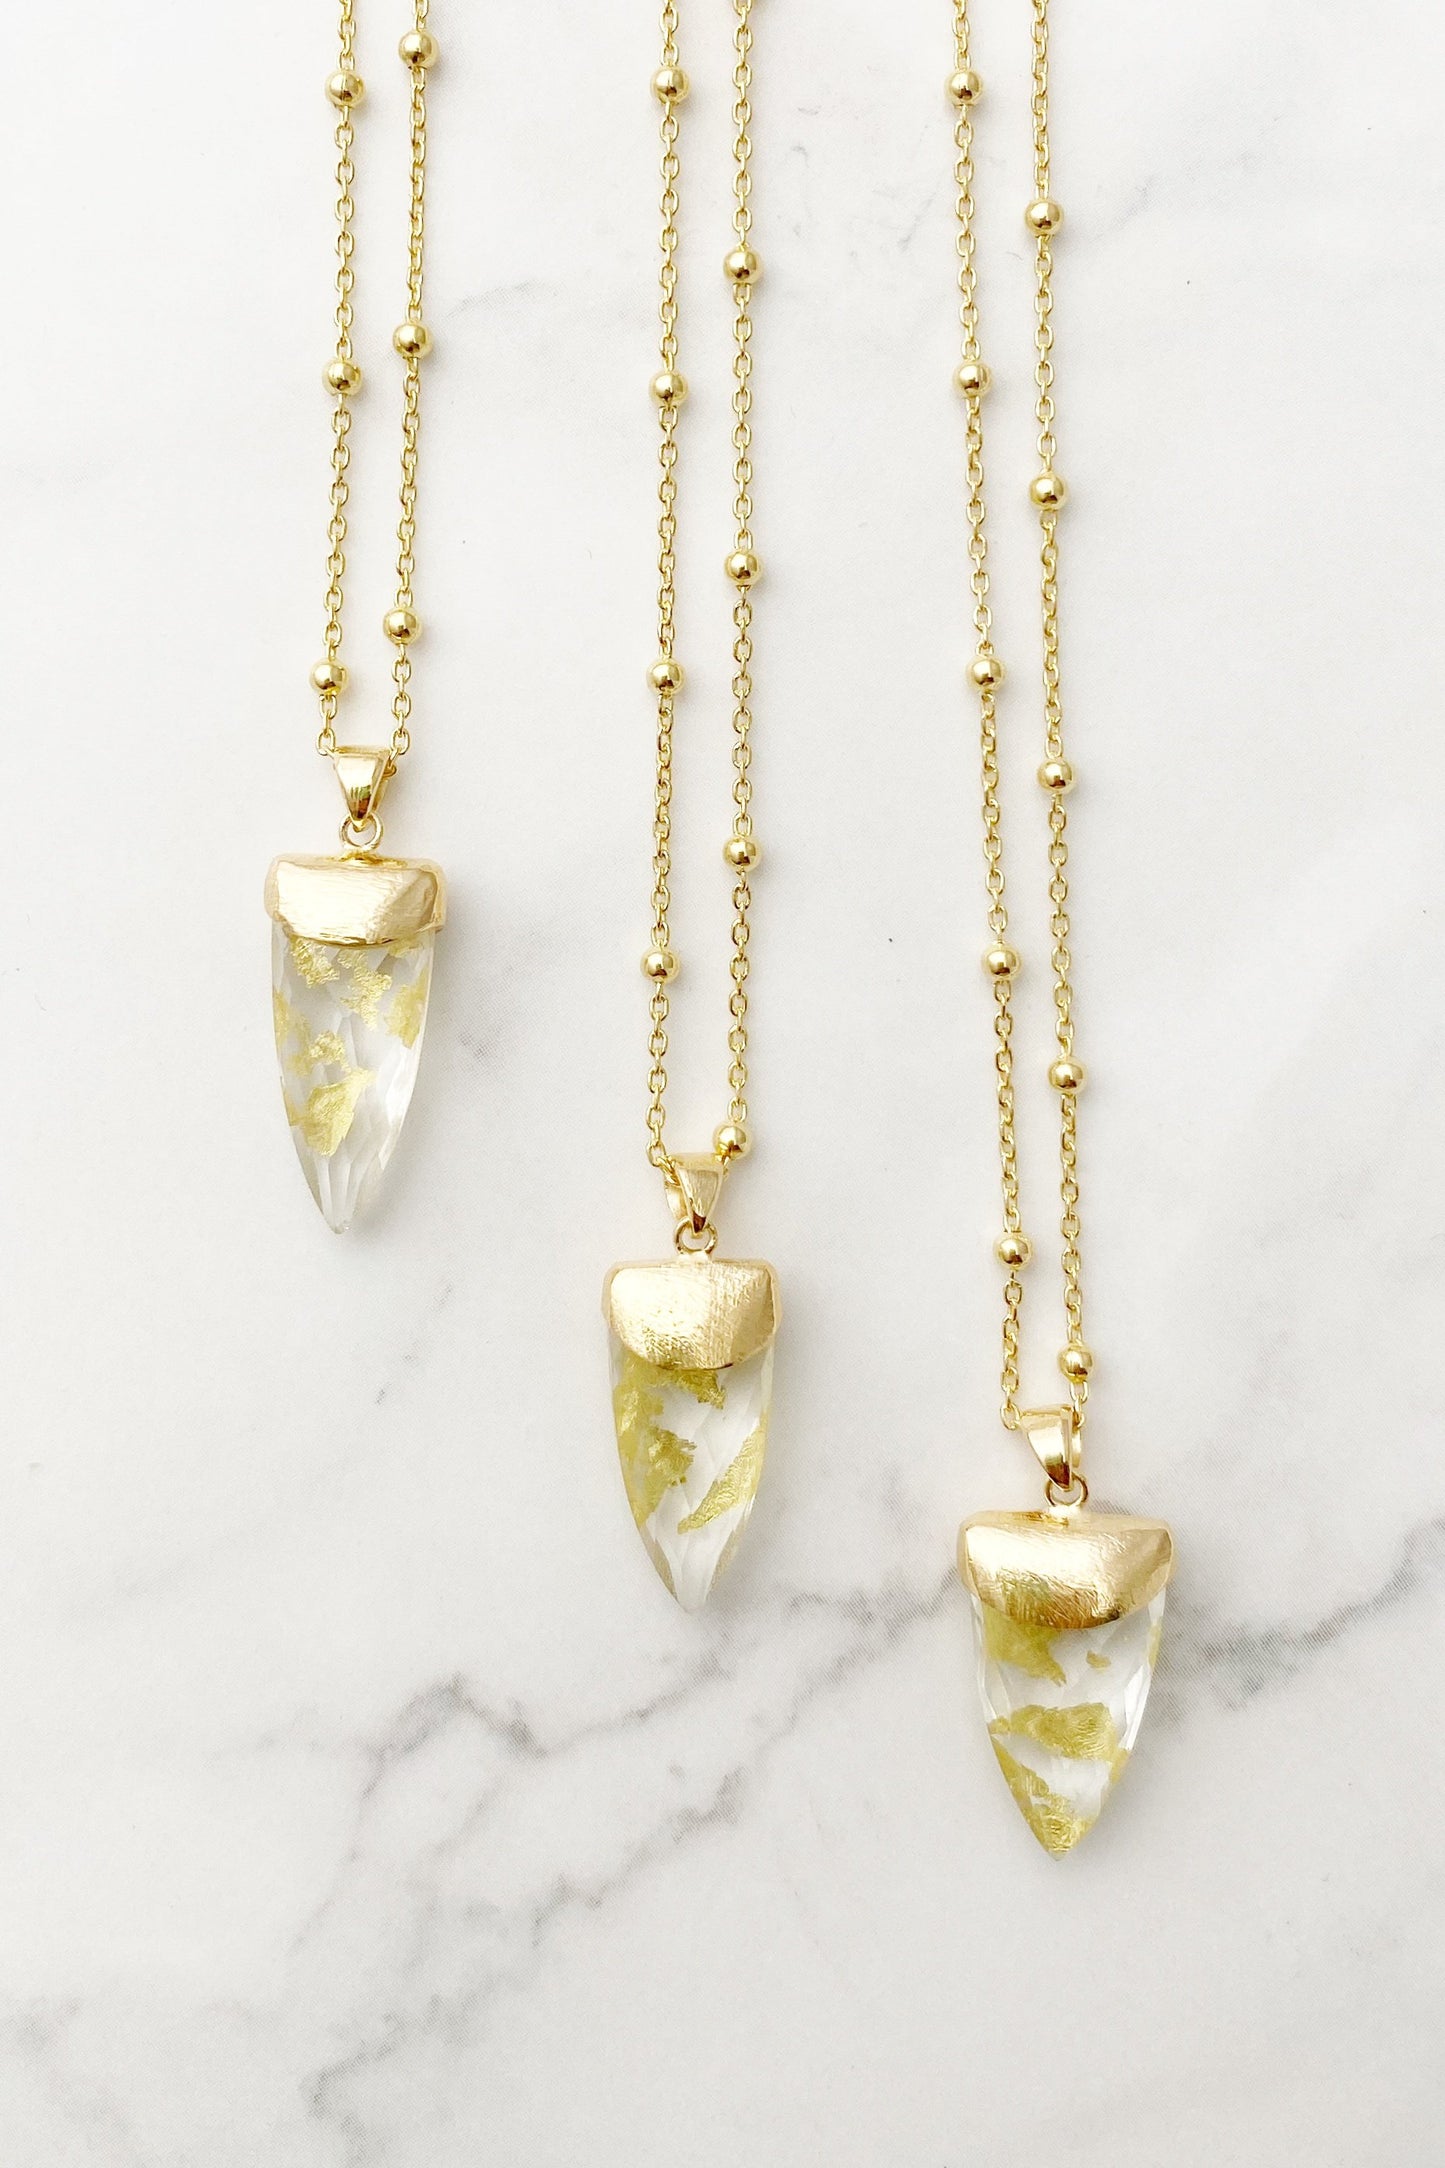 Three Guardian Clear Quartz Shield necklaces on a surface